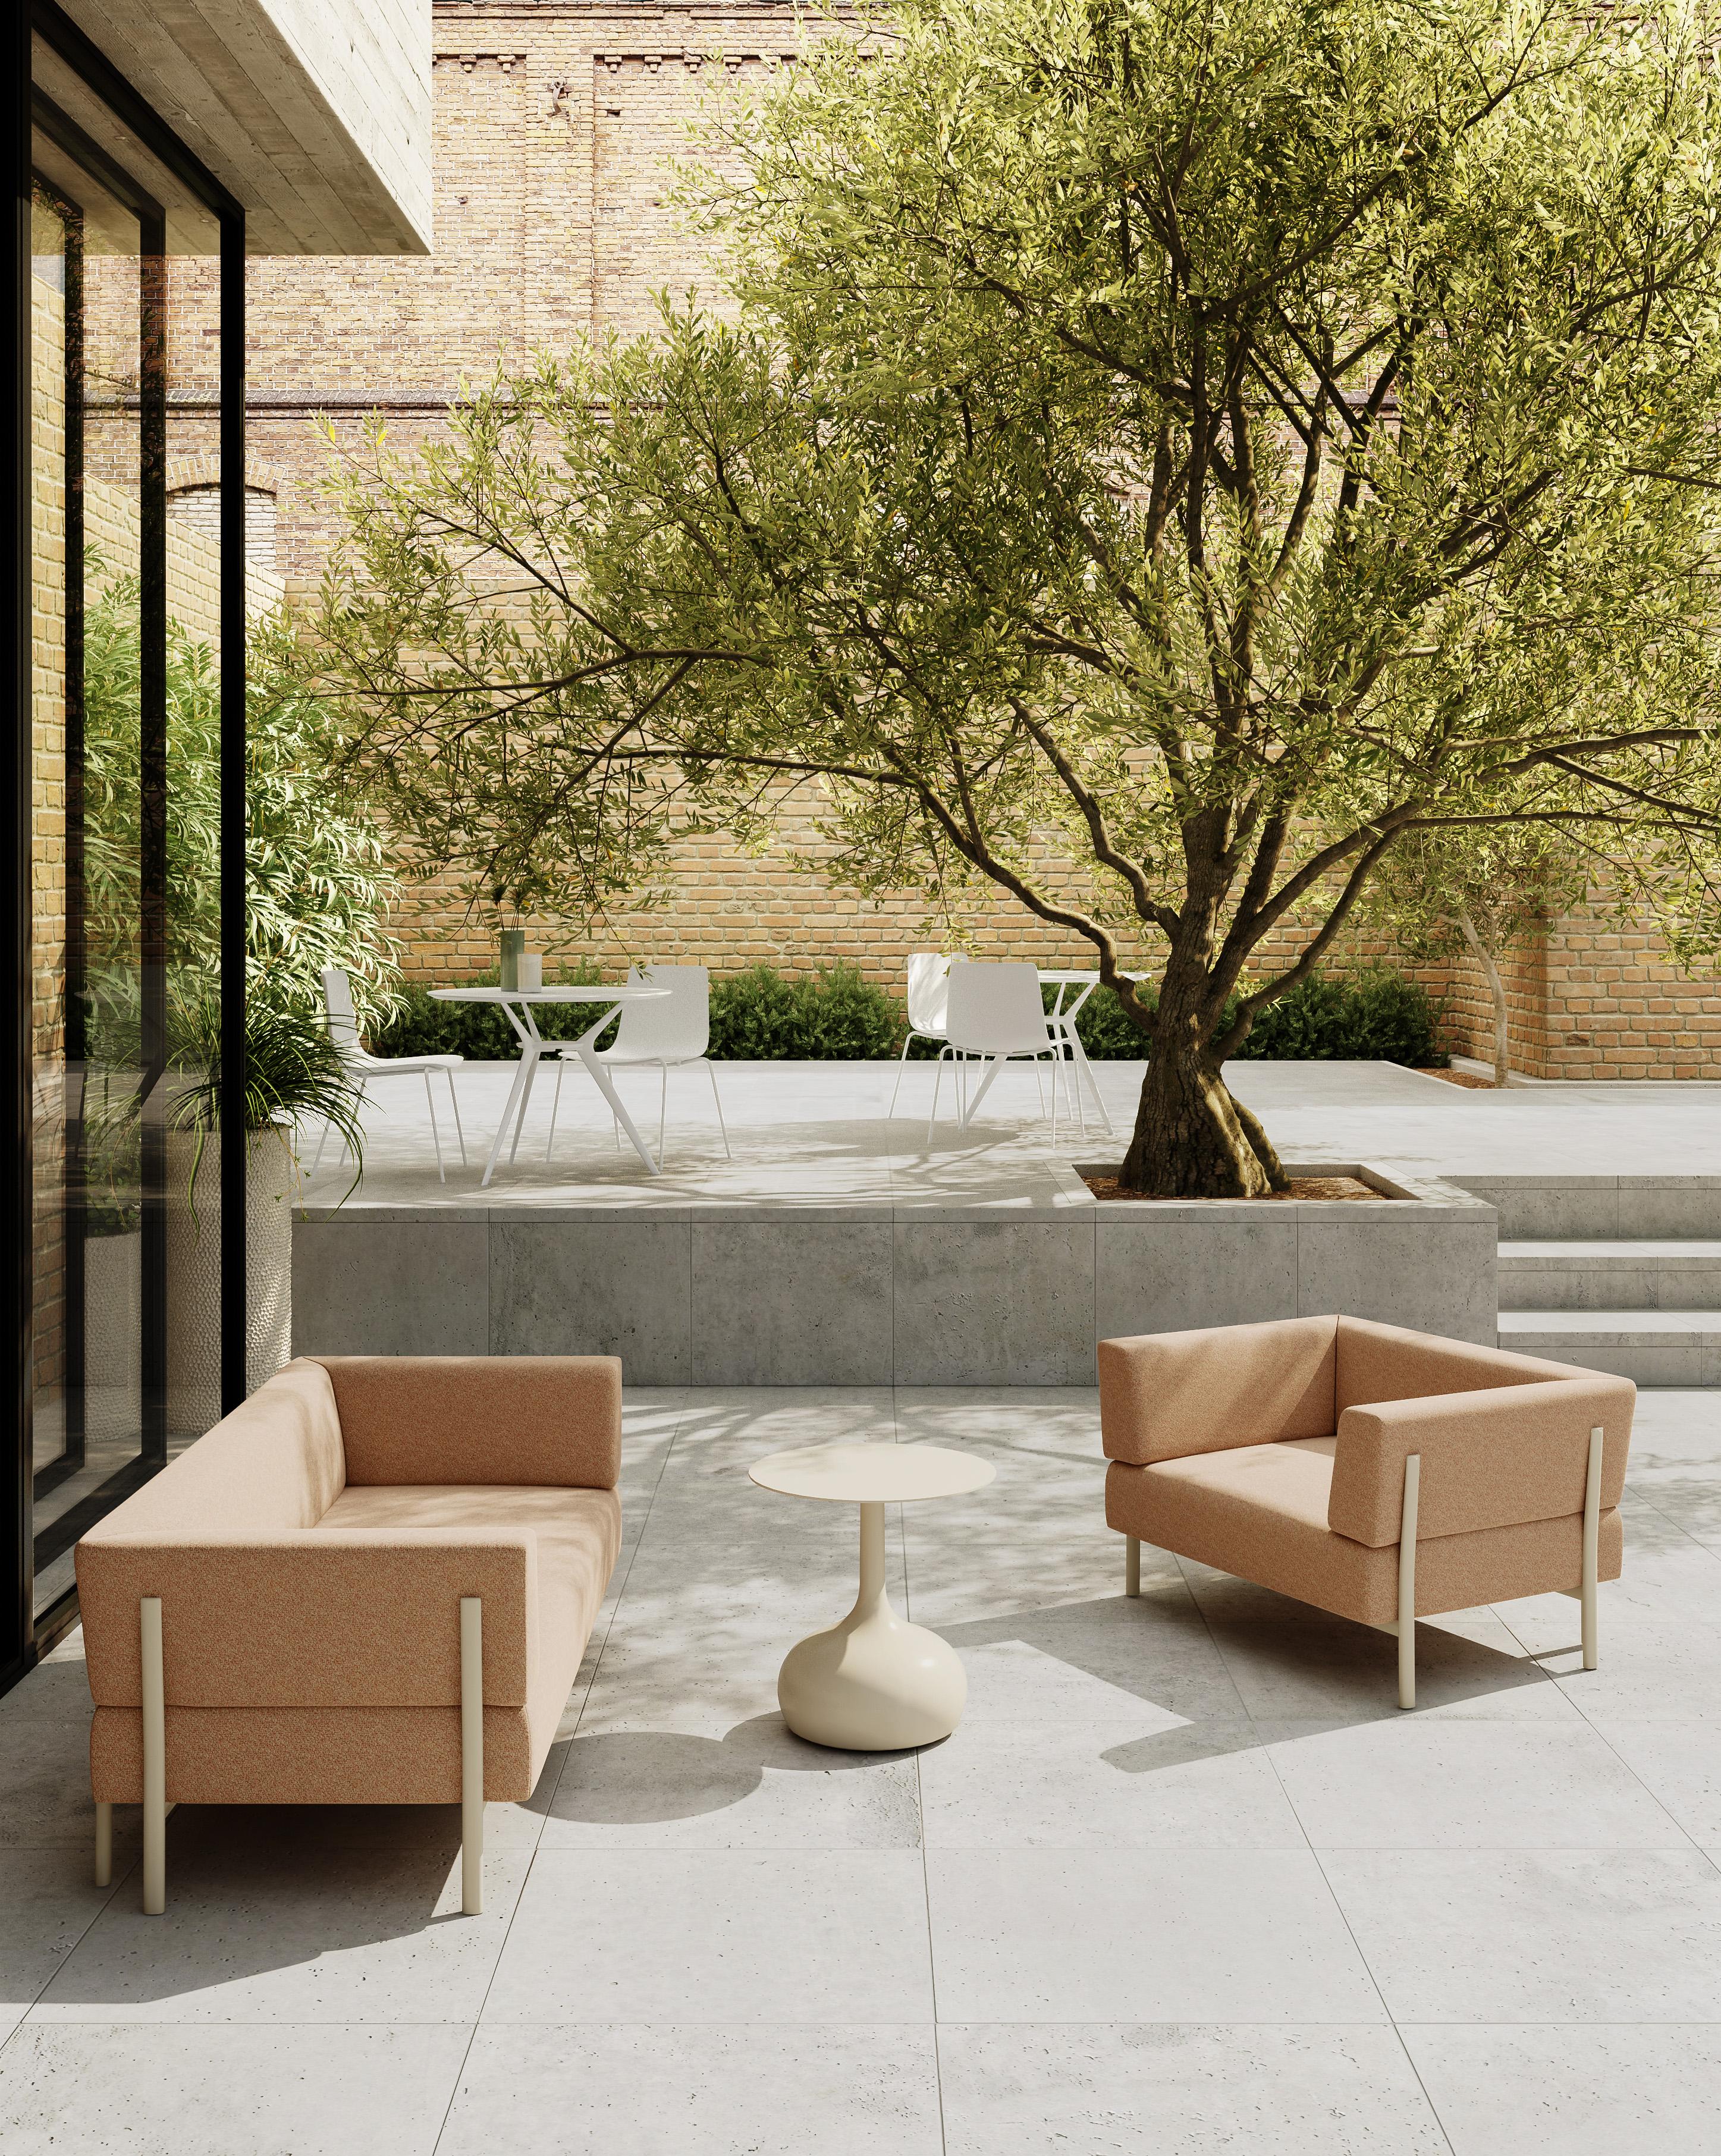 Alias T01_O Ten Outdoor Armchair in Beige with Sand Lacquered Aluminum Frame by PearsonLloyd

Armchair for outdoor use with lacquered die-cast aluminium legs and stainless steel frame.Seat, back and armrests with removable cover in fabric or